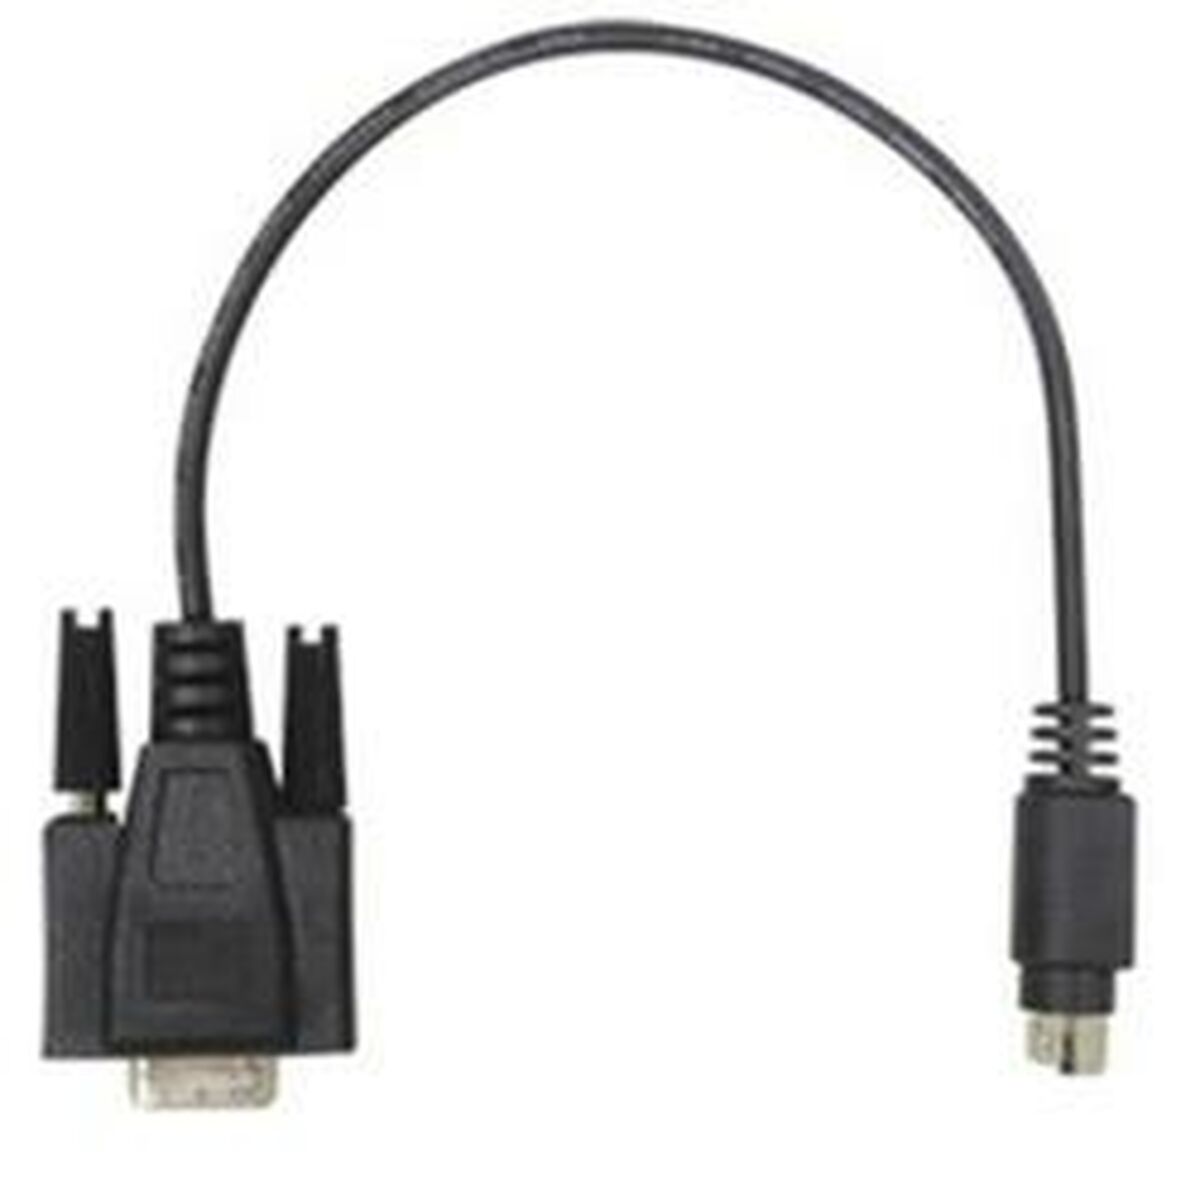 Cable RS-232 DIN6 AVer 064AOTHERB66, AVer, Electronics, Photography and video cameras, cable-rs-232-din6-aver-064aotherb66, Brand_AVer, category-reference-2609, category-reference-2932, category-reference-2936, category-reference-t-19653, category-reference-t-8122, category-reference-t-8123, category-reference-t-8140, Condition_NEW, fotografía, Price_20 - 50, travel, RiotNook